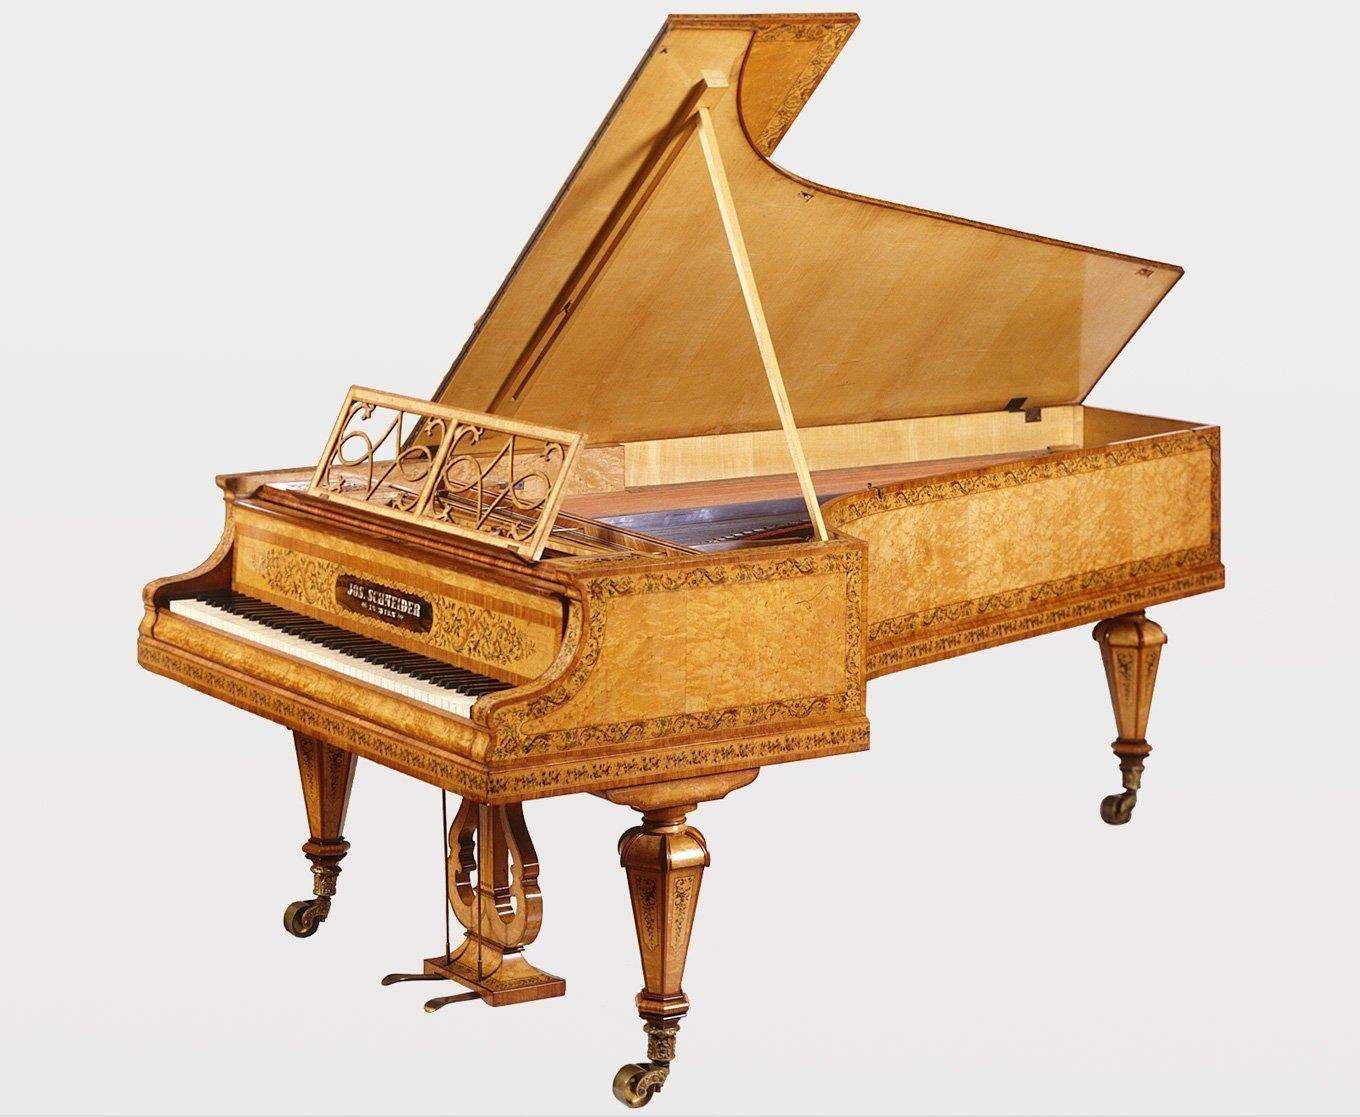 A guide price of £20,000 to £30,000 is on this Schneider piano